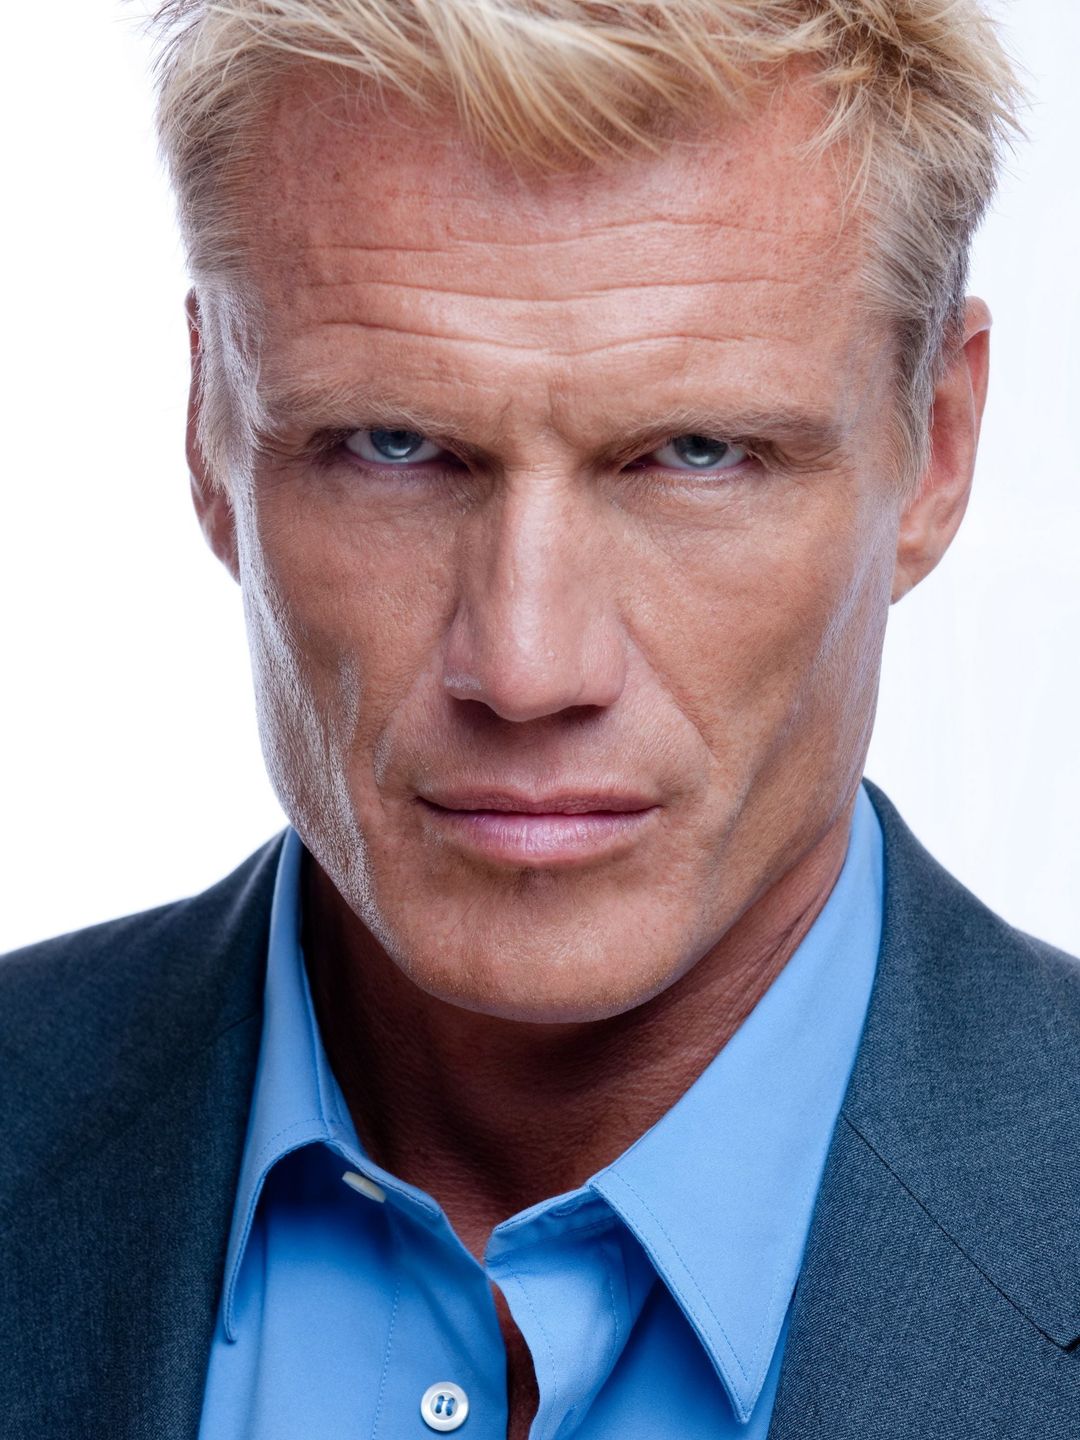 Dolph Lundgren where does he live